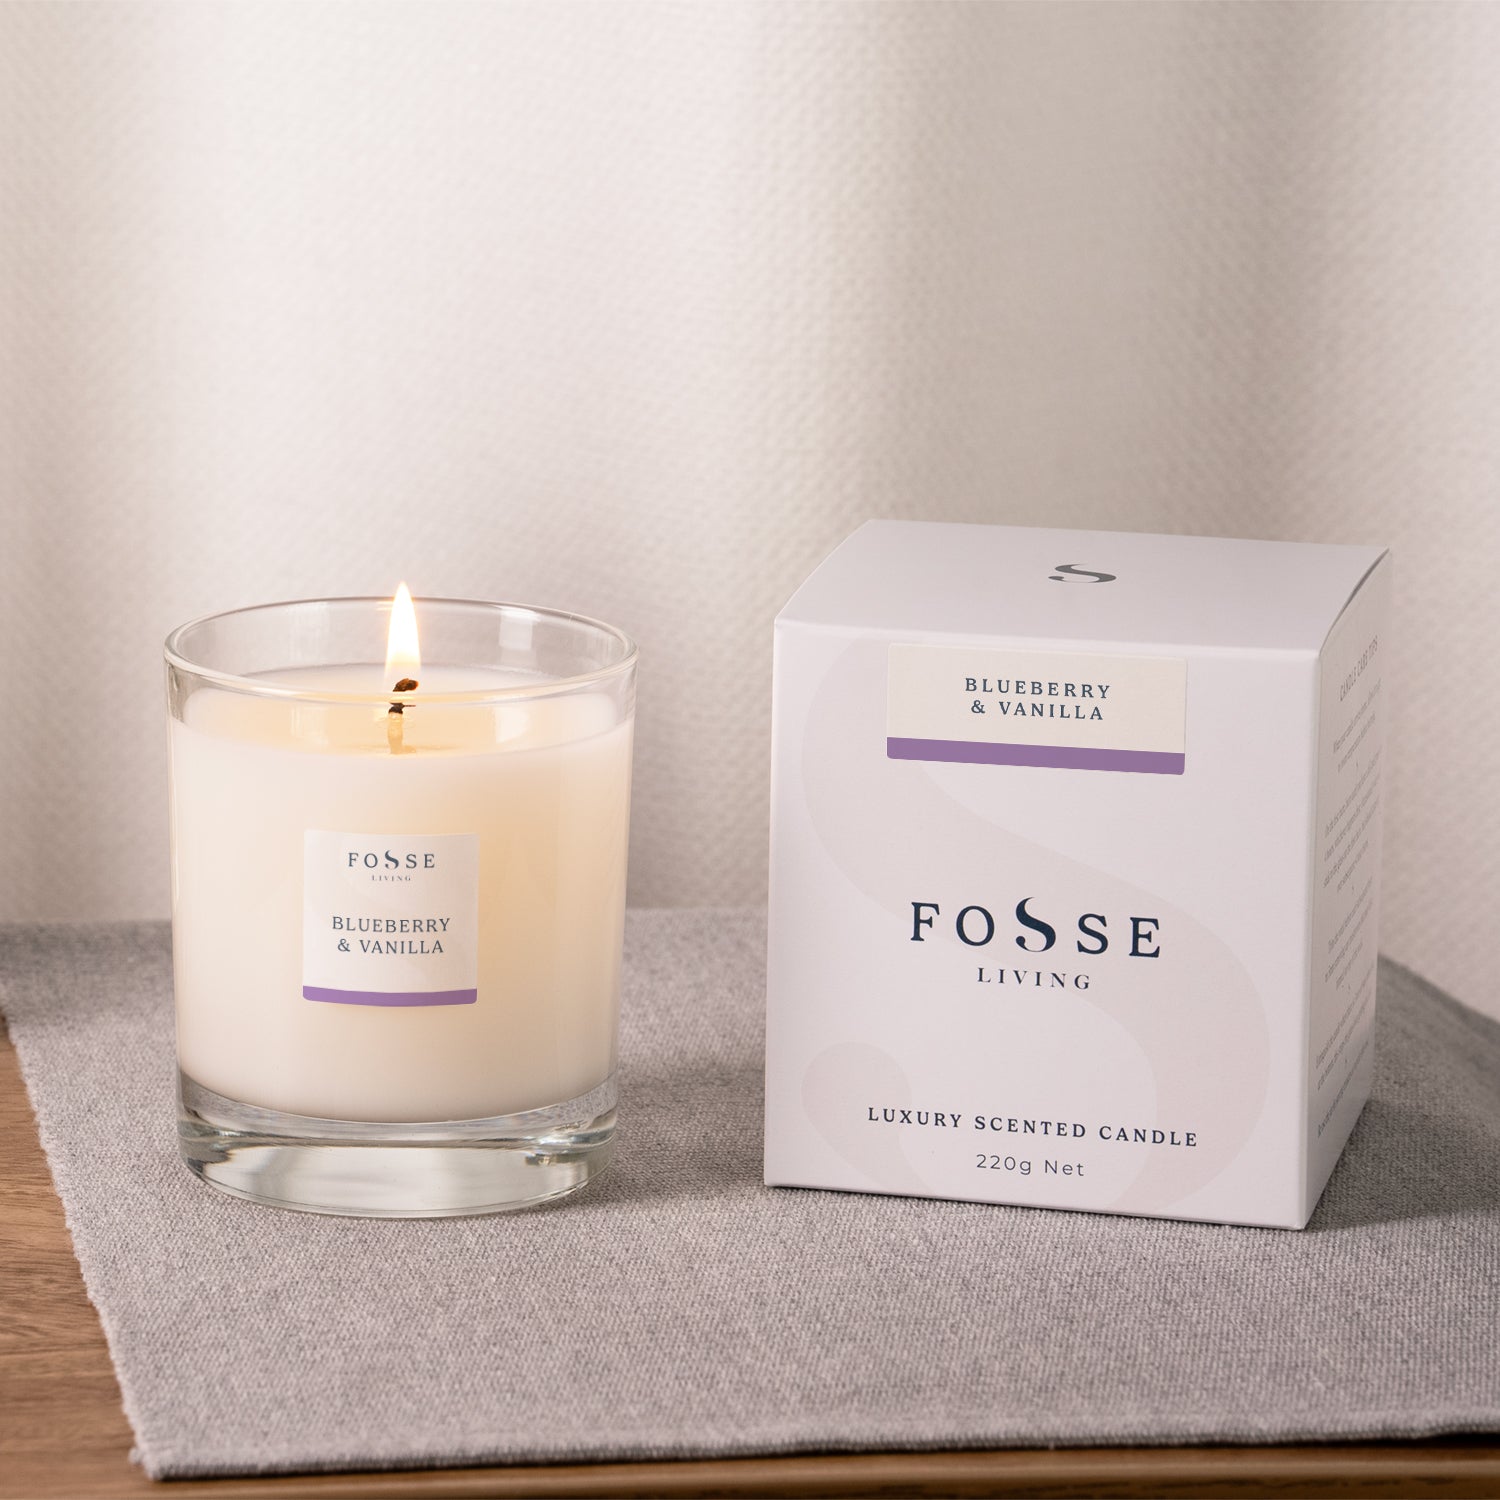 Blueberry & Vanilla Scented Candle - Fosse Living | Luxury Home Fragrances